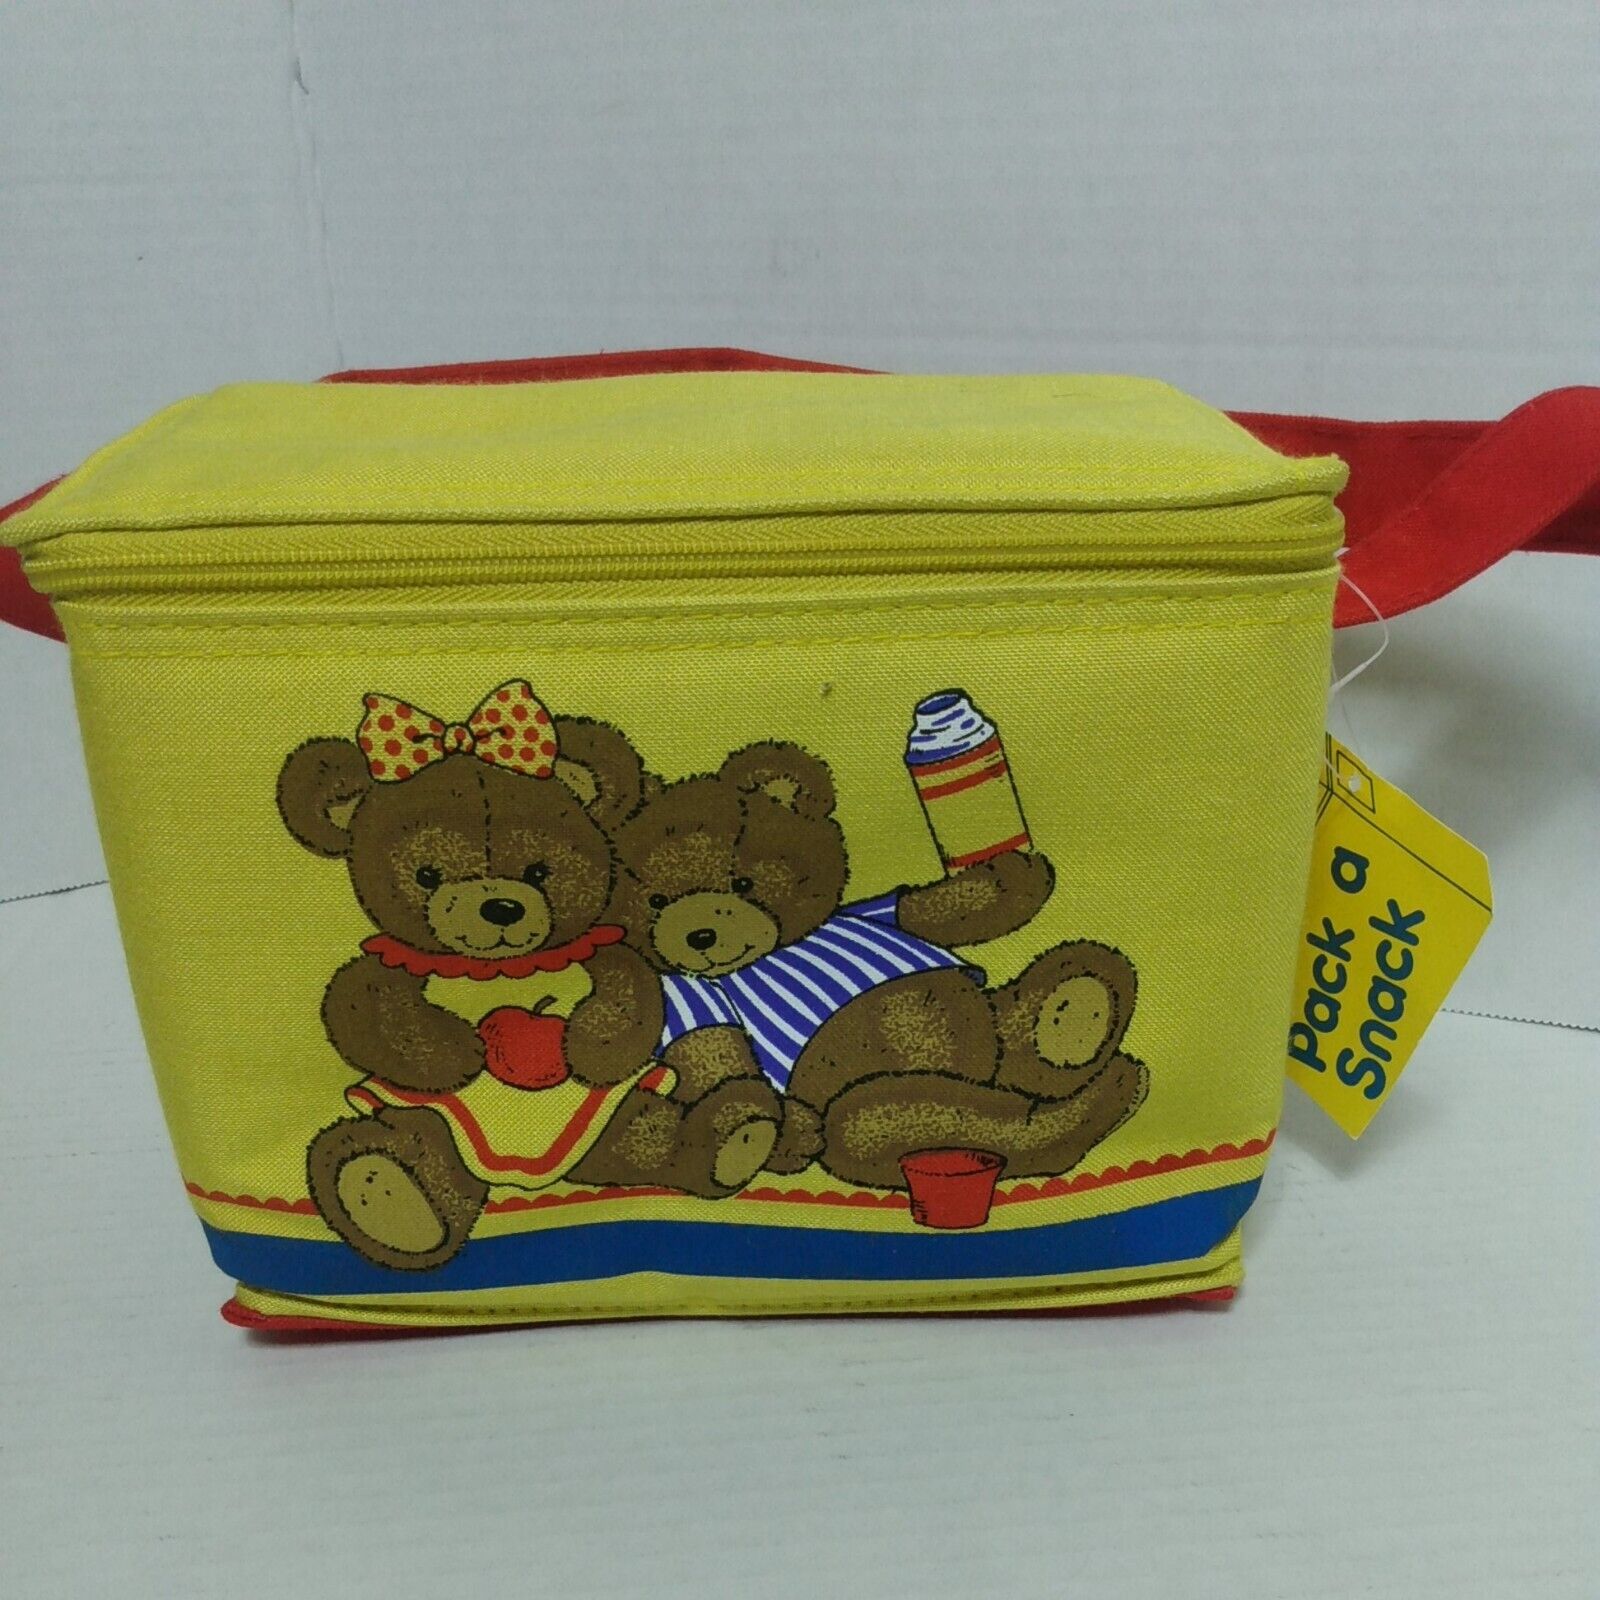 Vintage Pack A Snack Lunchbox 1987 wow nos Teddy bears.....